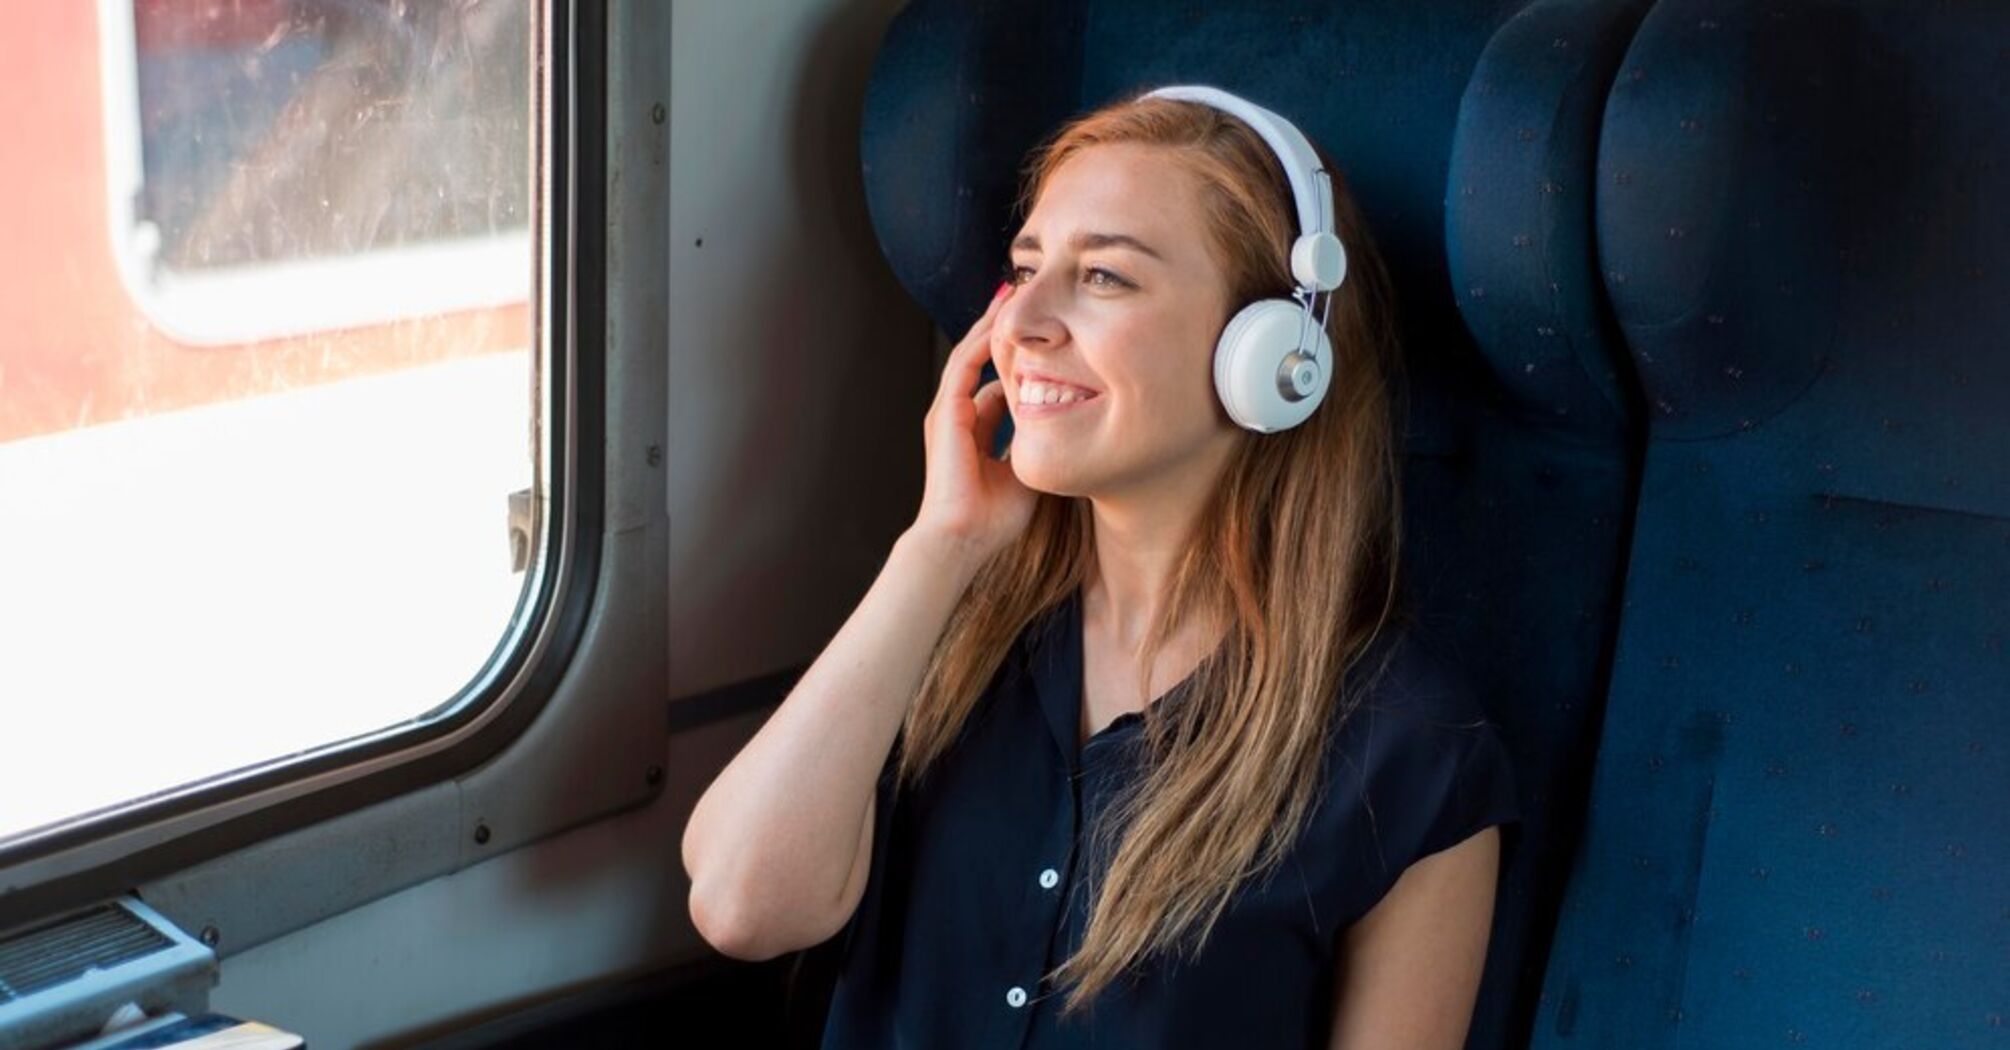 Don't block the aisle and don't eat smelly food: how to behave when traveling by train